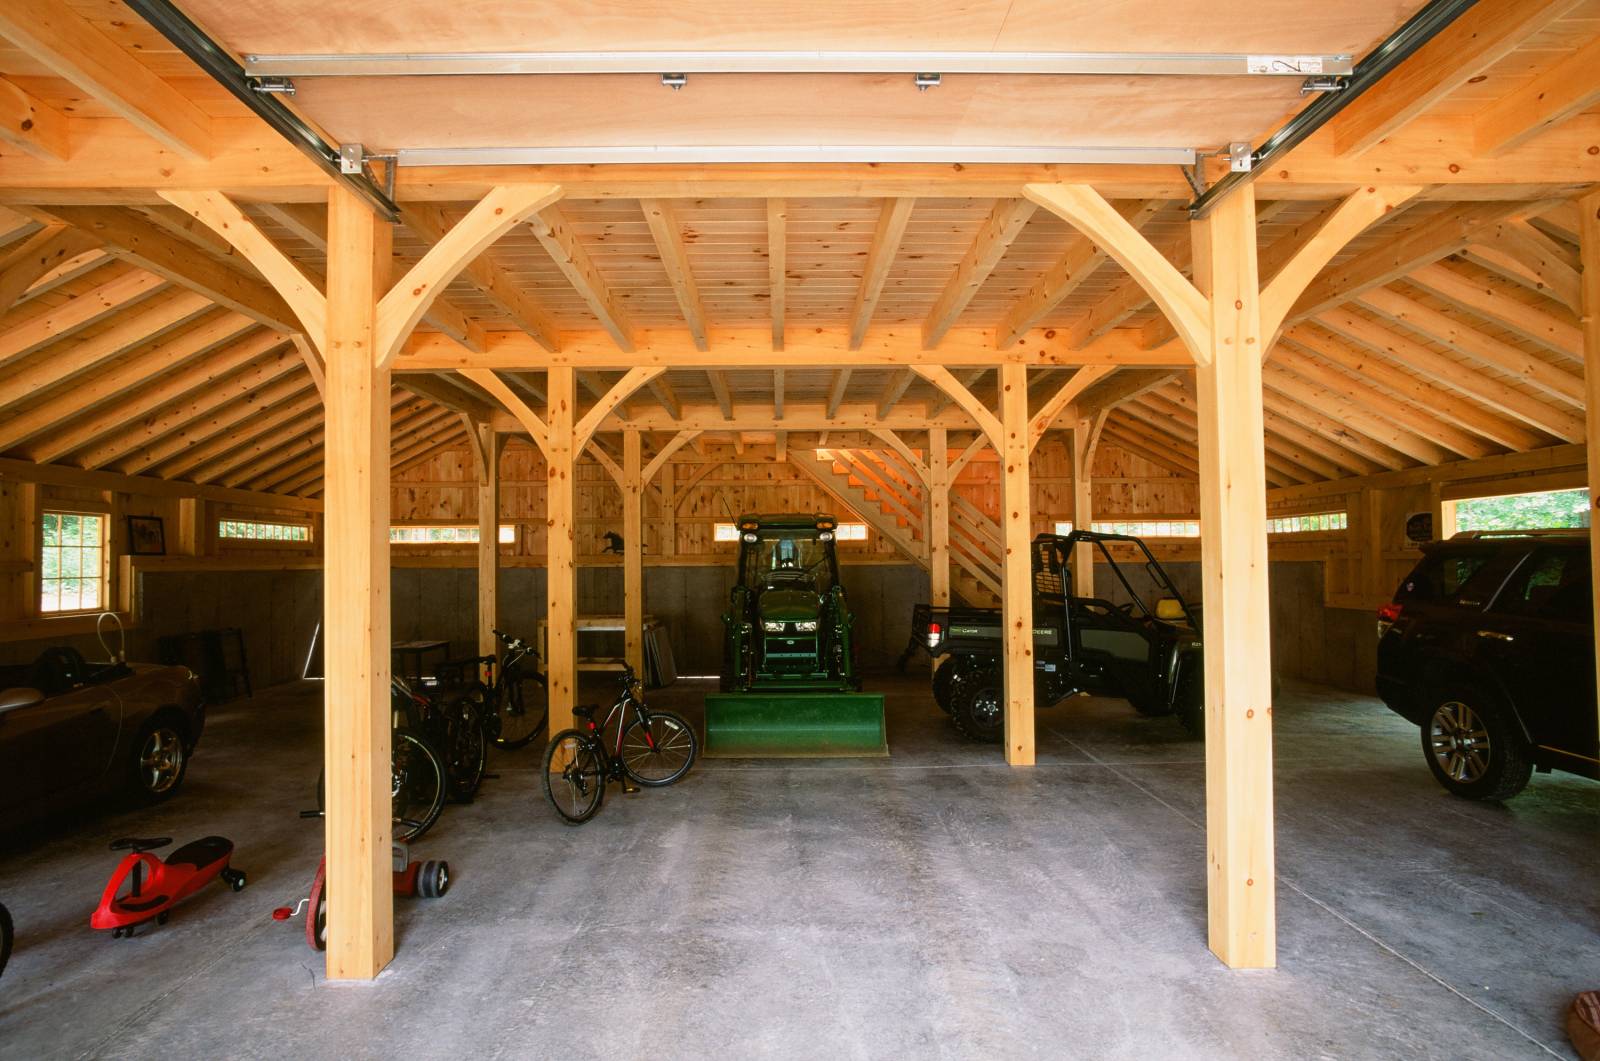 Inside the Carriage Barn • authentic post & beam construction